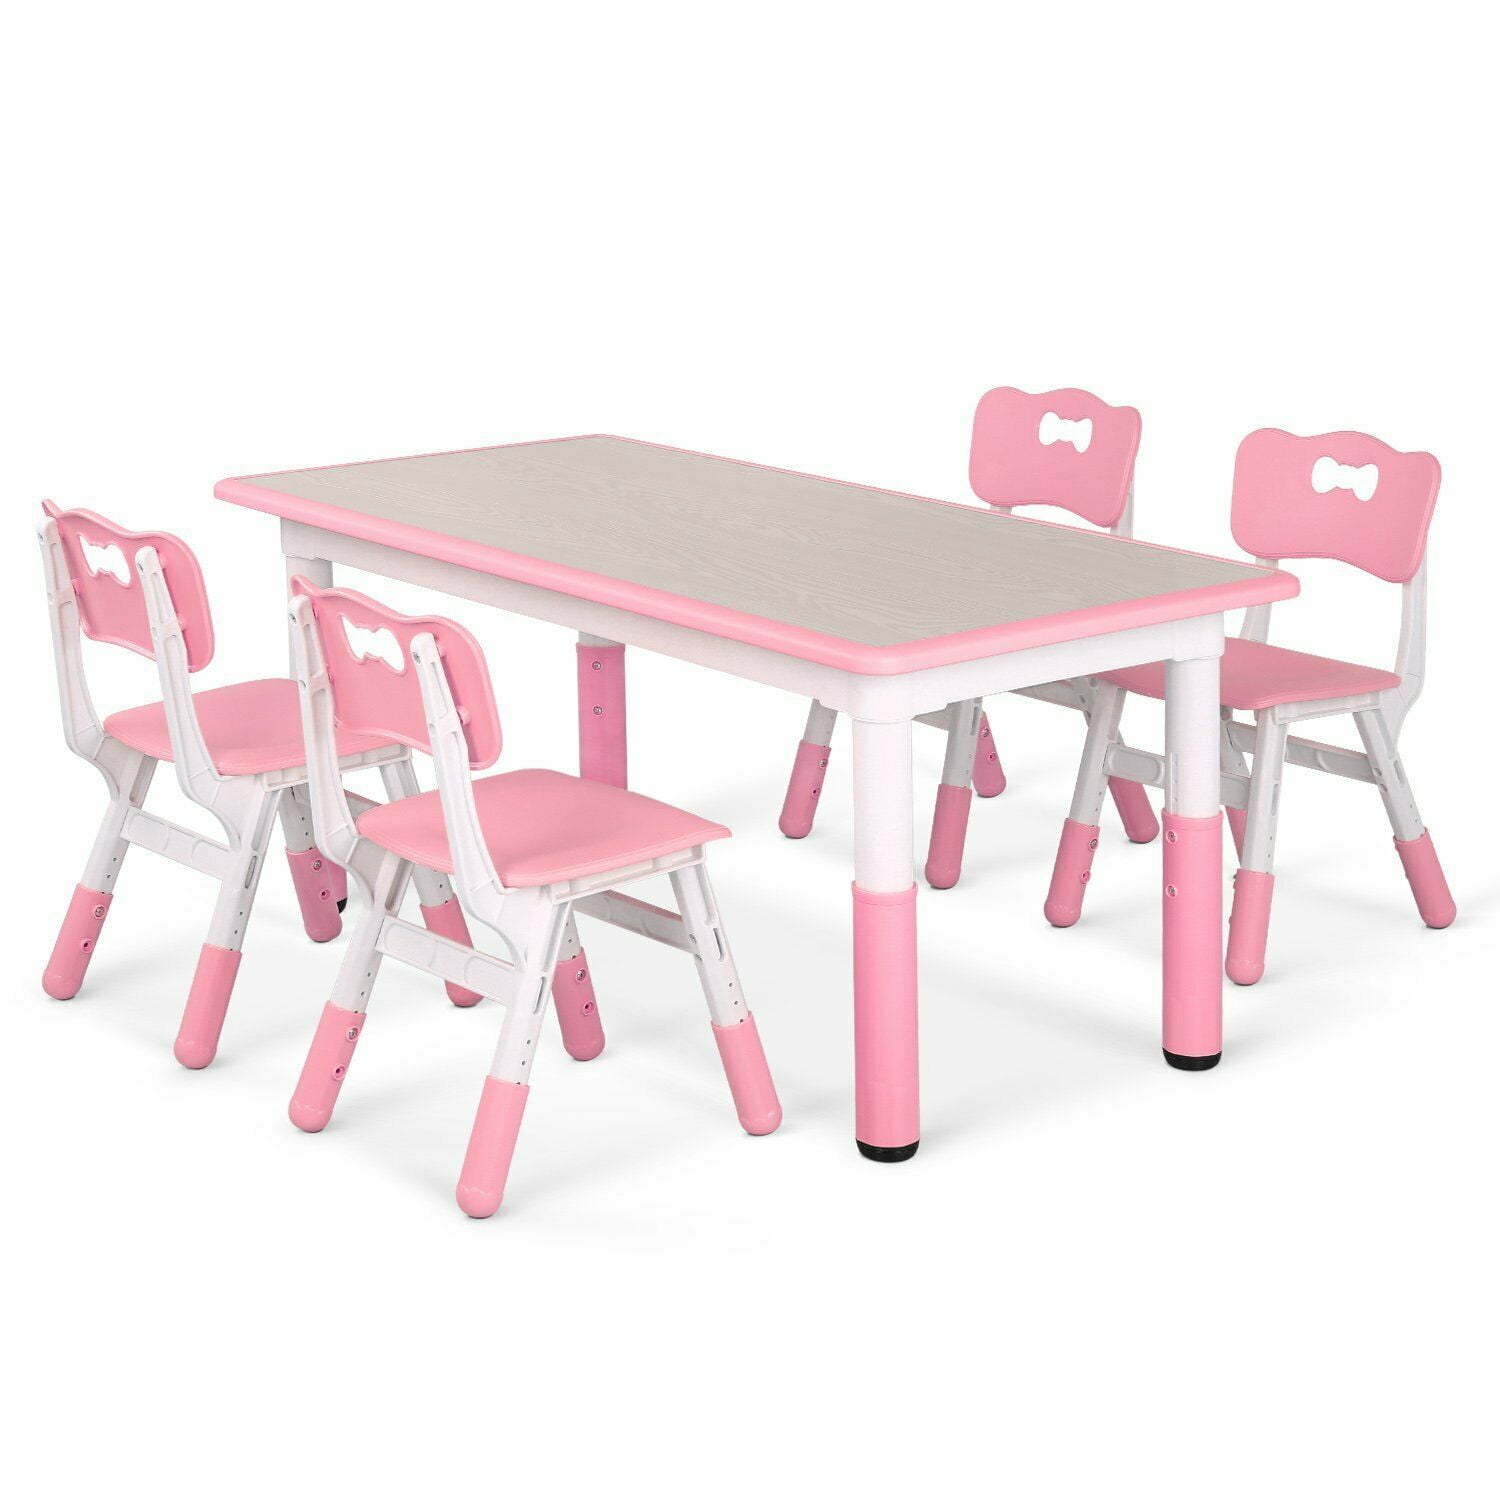 Pirecart Kids Table and Chair Set, Height Adjustable Toddler Table with ...